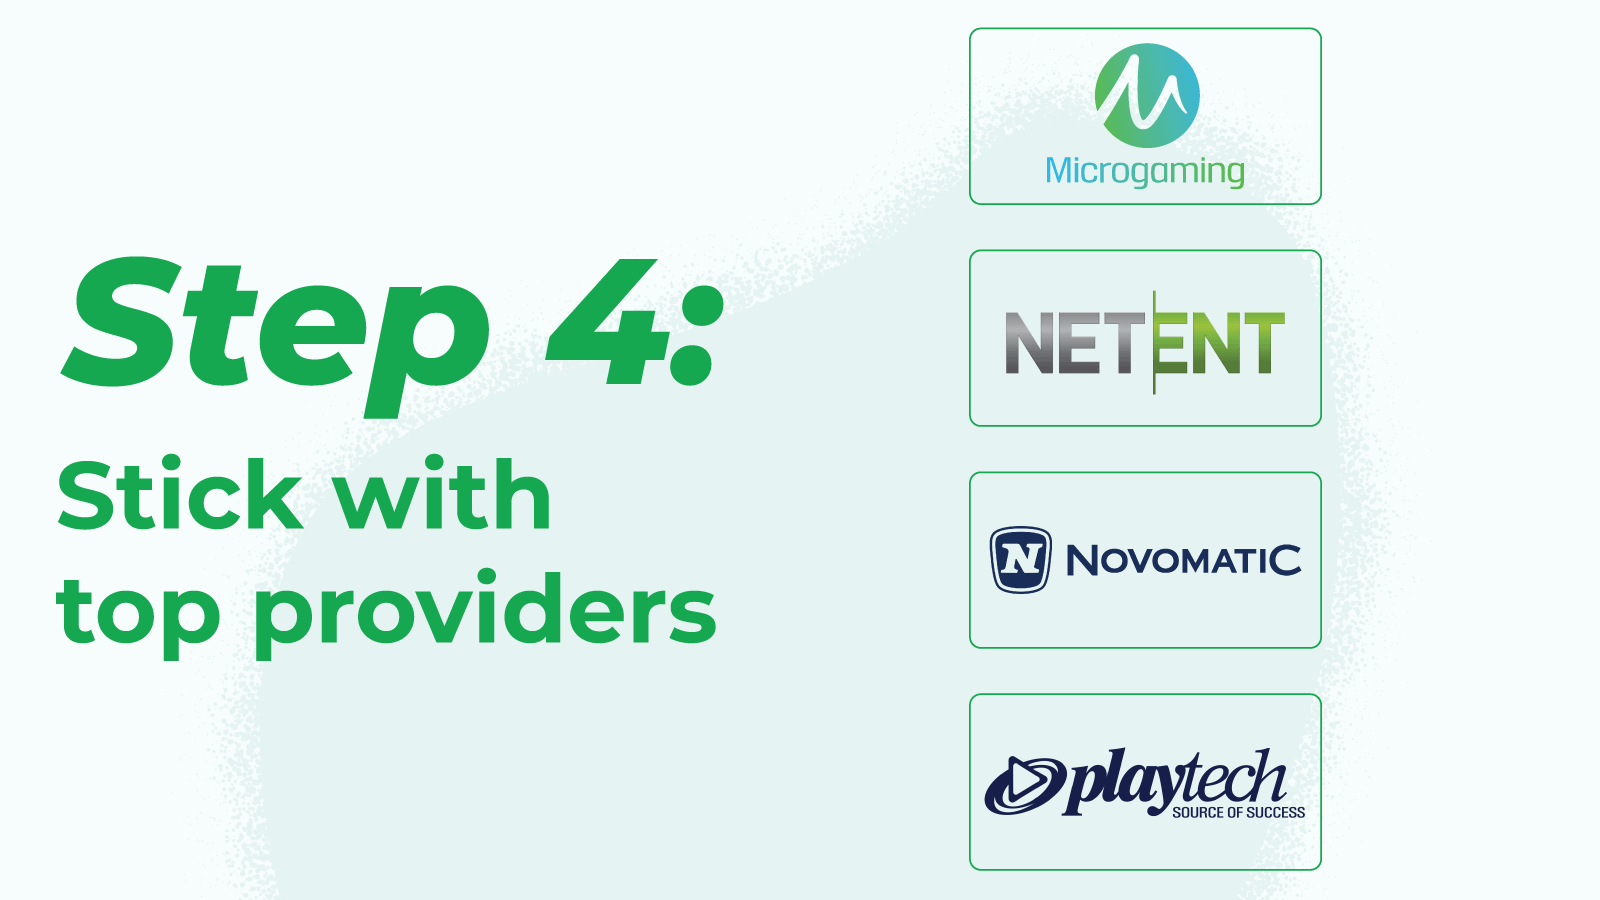 Step 4: Stick with top providers